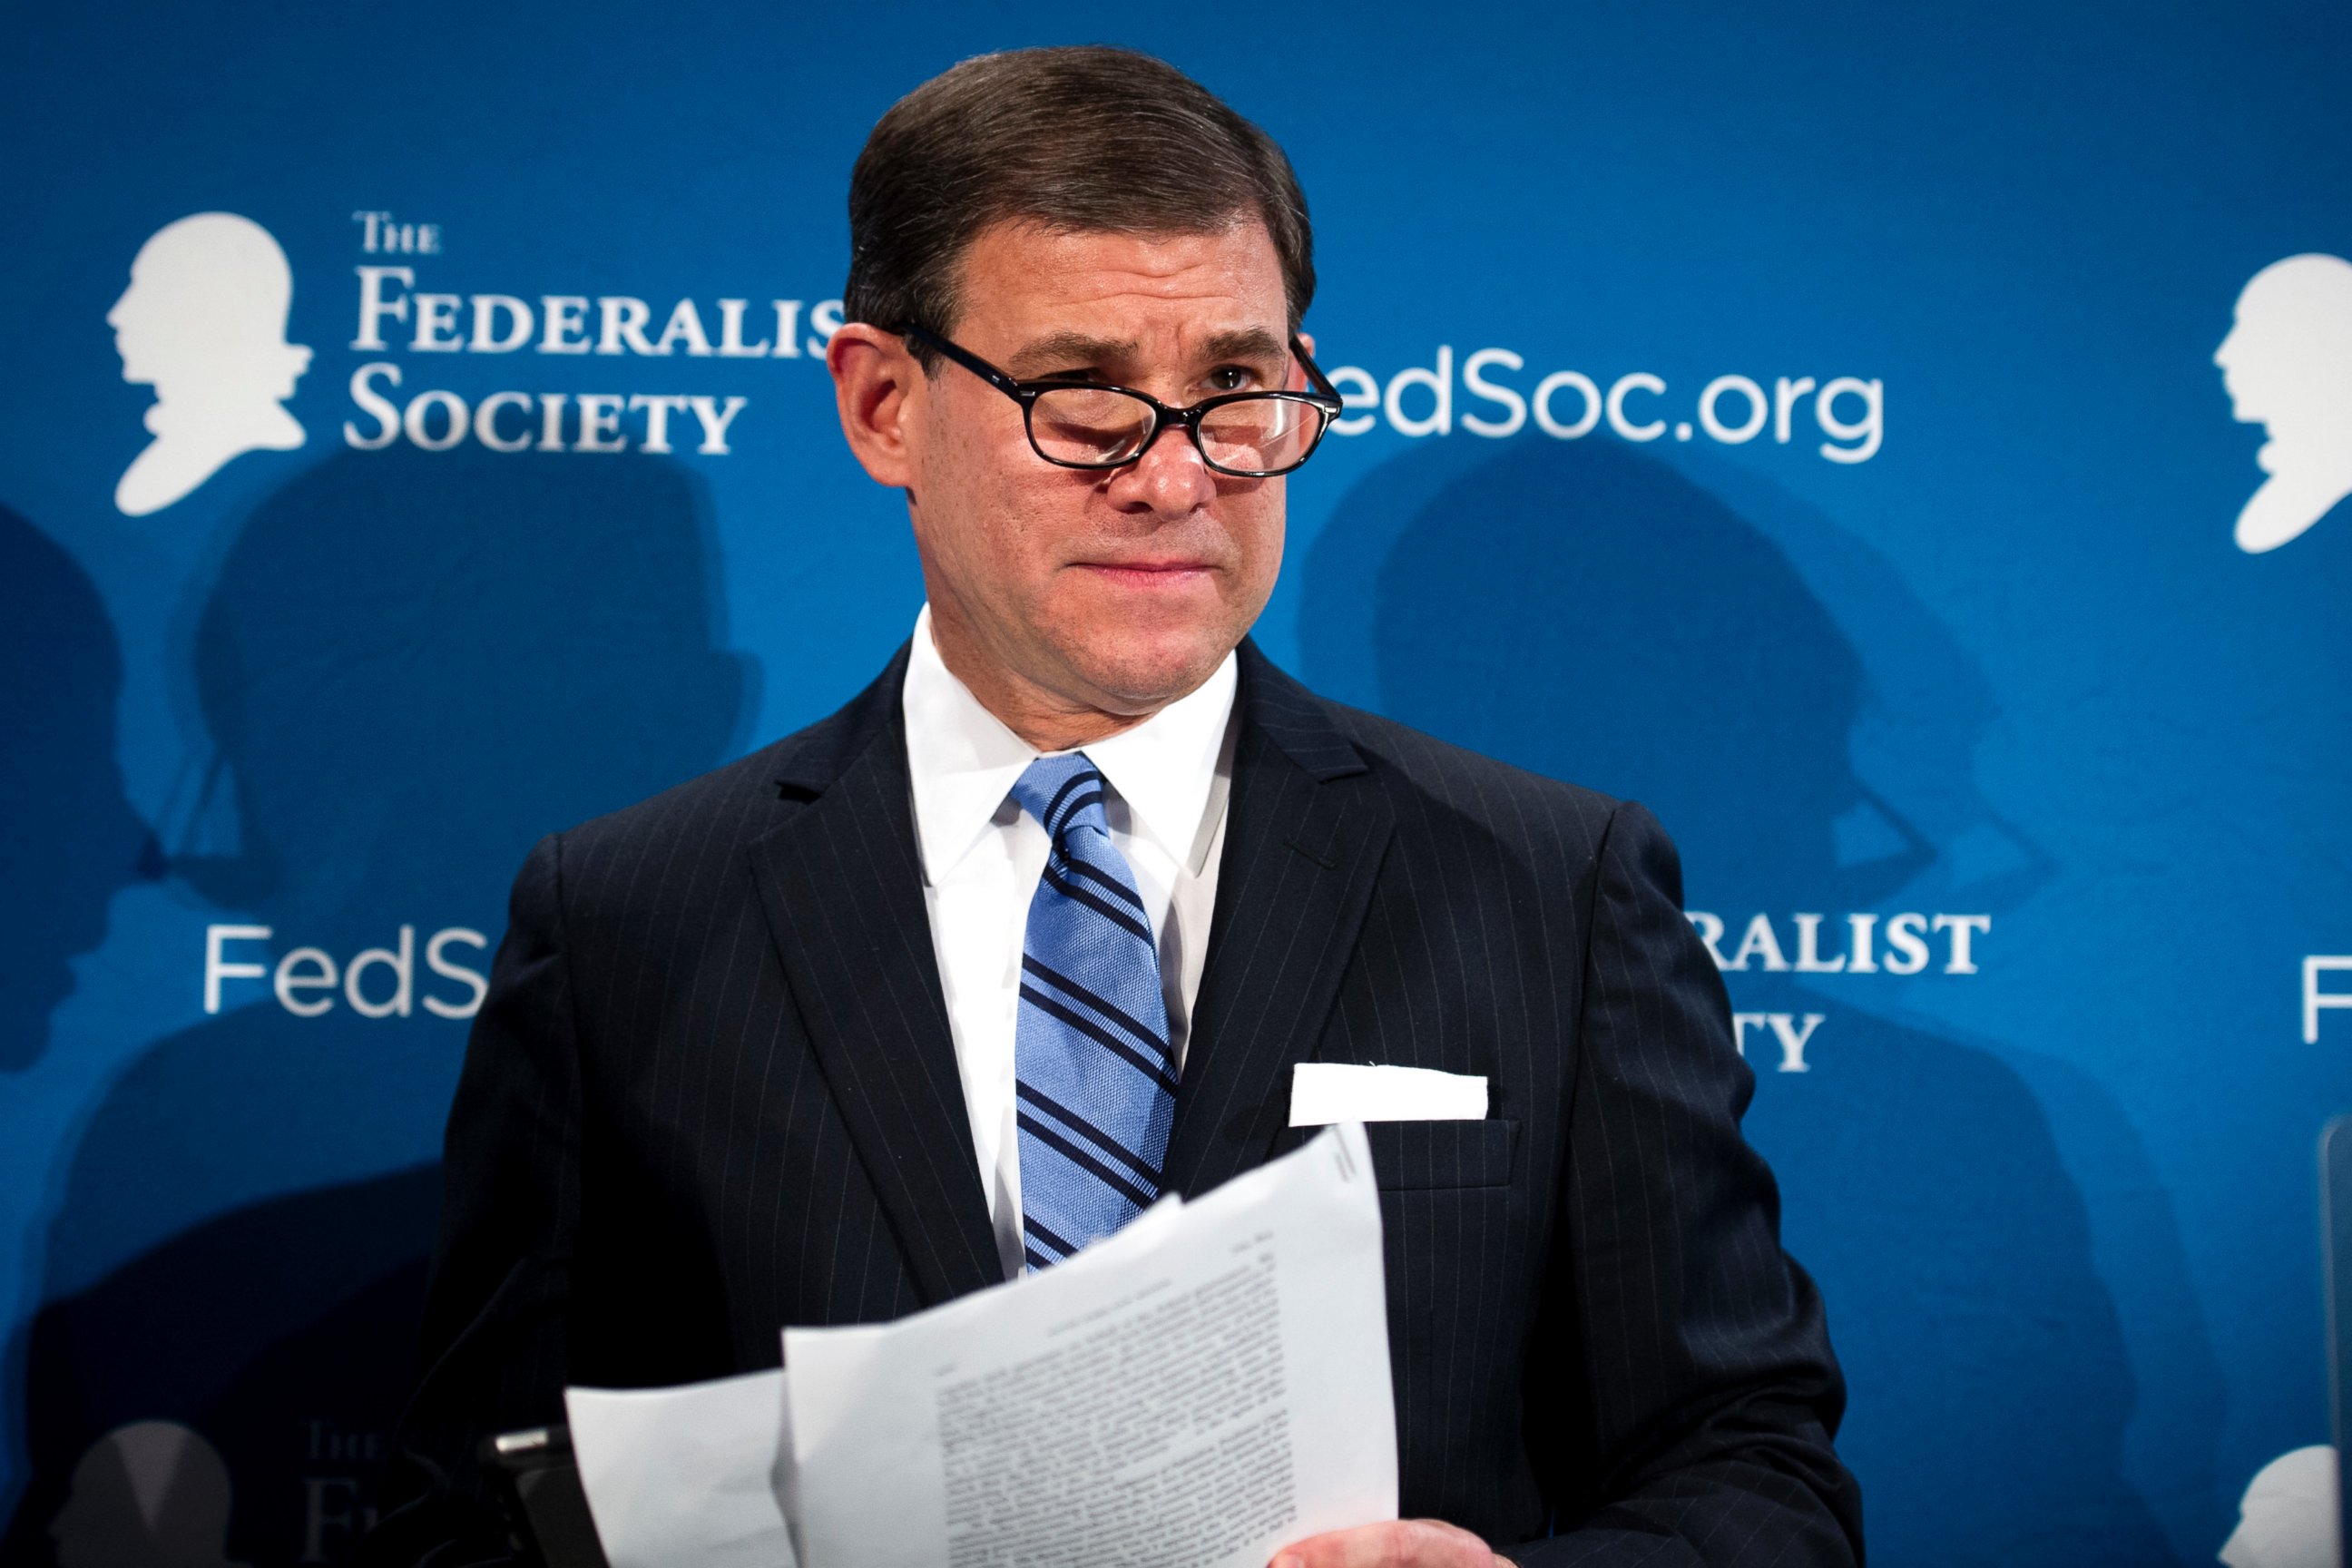 PHOTO: Judge William Pryor, U.S. Court of Appeals, Eleventh Circuit, moderates a panel discussion during the Federalist Society's National Lawyers Convention in Washington, Nov. 17, 2016.